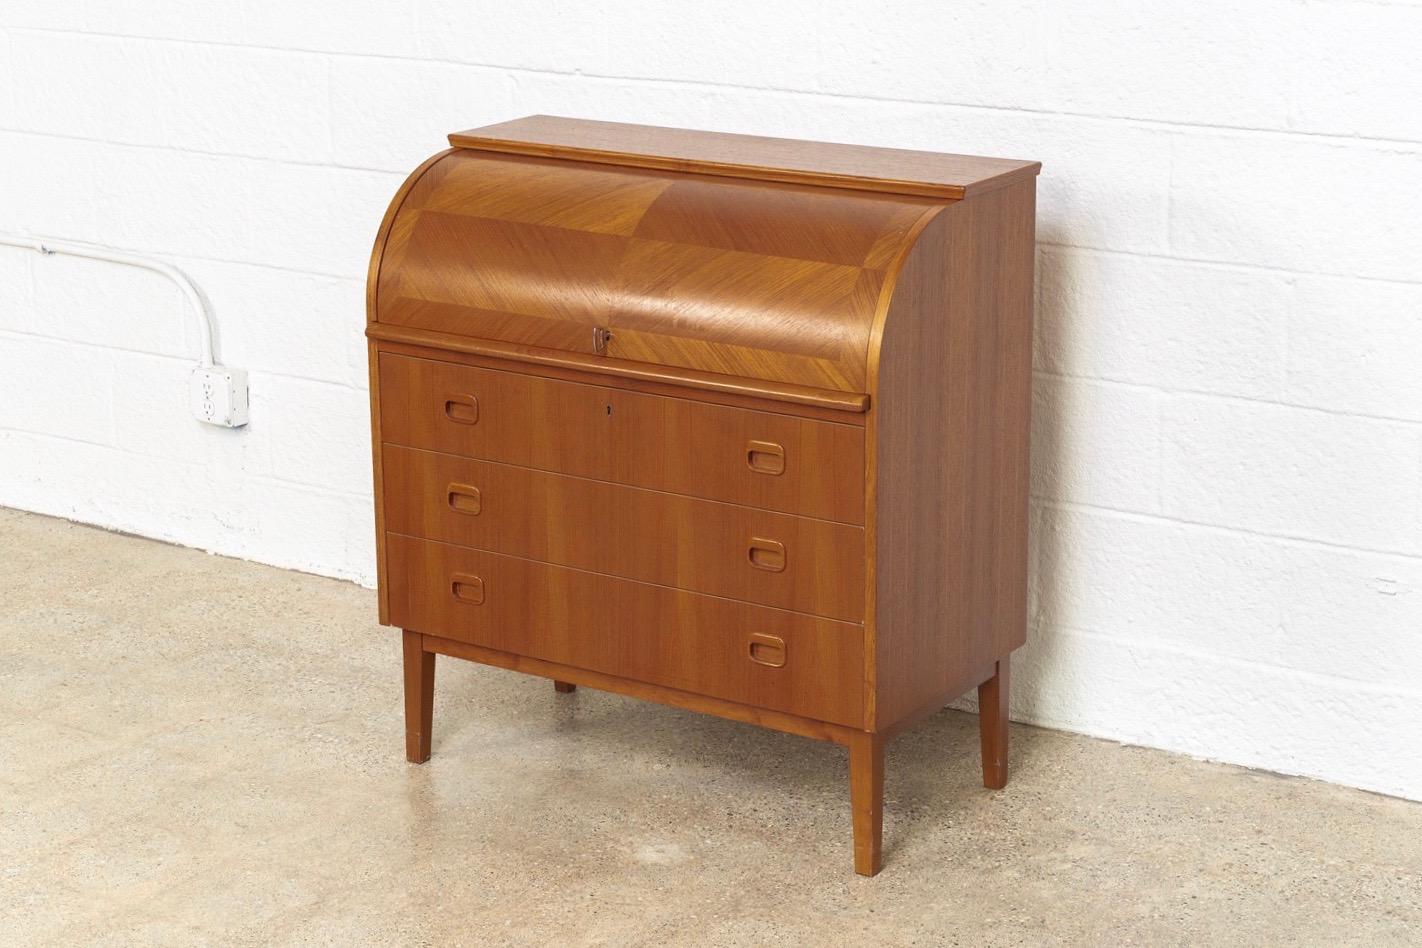 This iconic midcentury Swedish modern Egon Ostergaard teak cylinder rolltop secretary desk cabinet is circa 1970. The Classic Scandinavian modern design has clean Minimalist lines and features a beautiful inlaid opposing-grain pattern rolltop